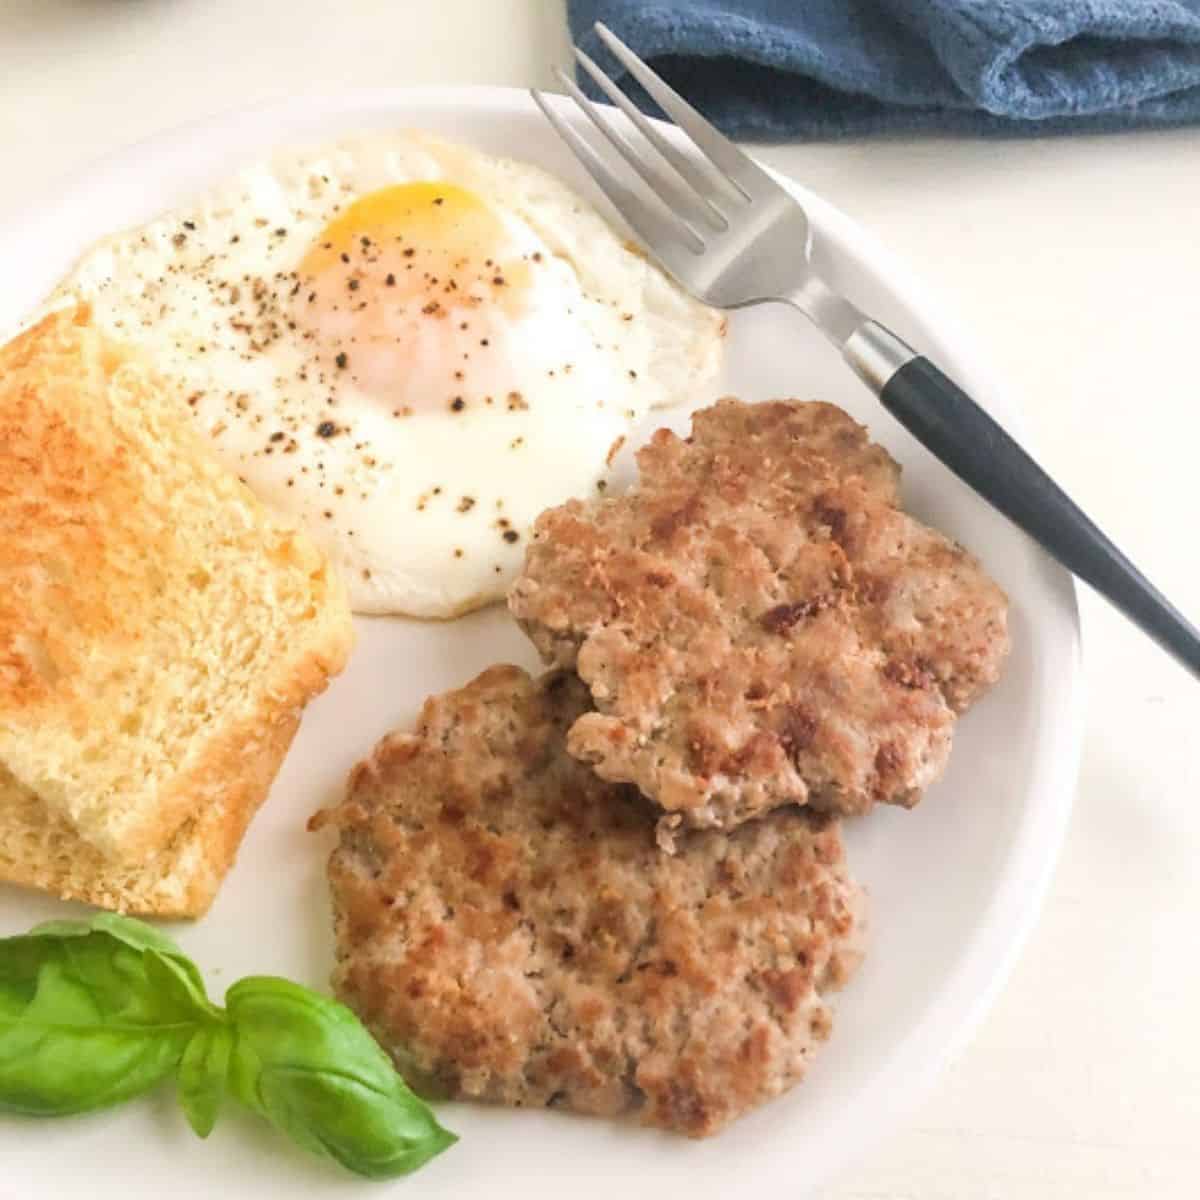 Medium round white plate with two sausage patties, over easy egg, two pieces of toast, and fresh basil as garnish and silver fork with black handle on the plate. Purple coffee cup and dark blue kitchen towel in the back ground.